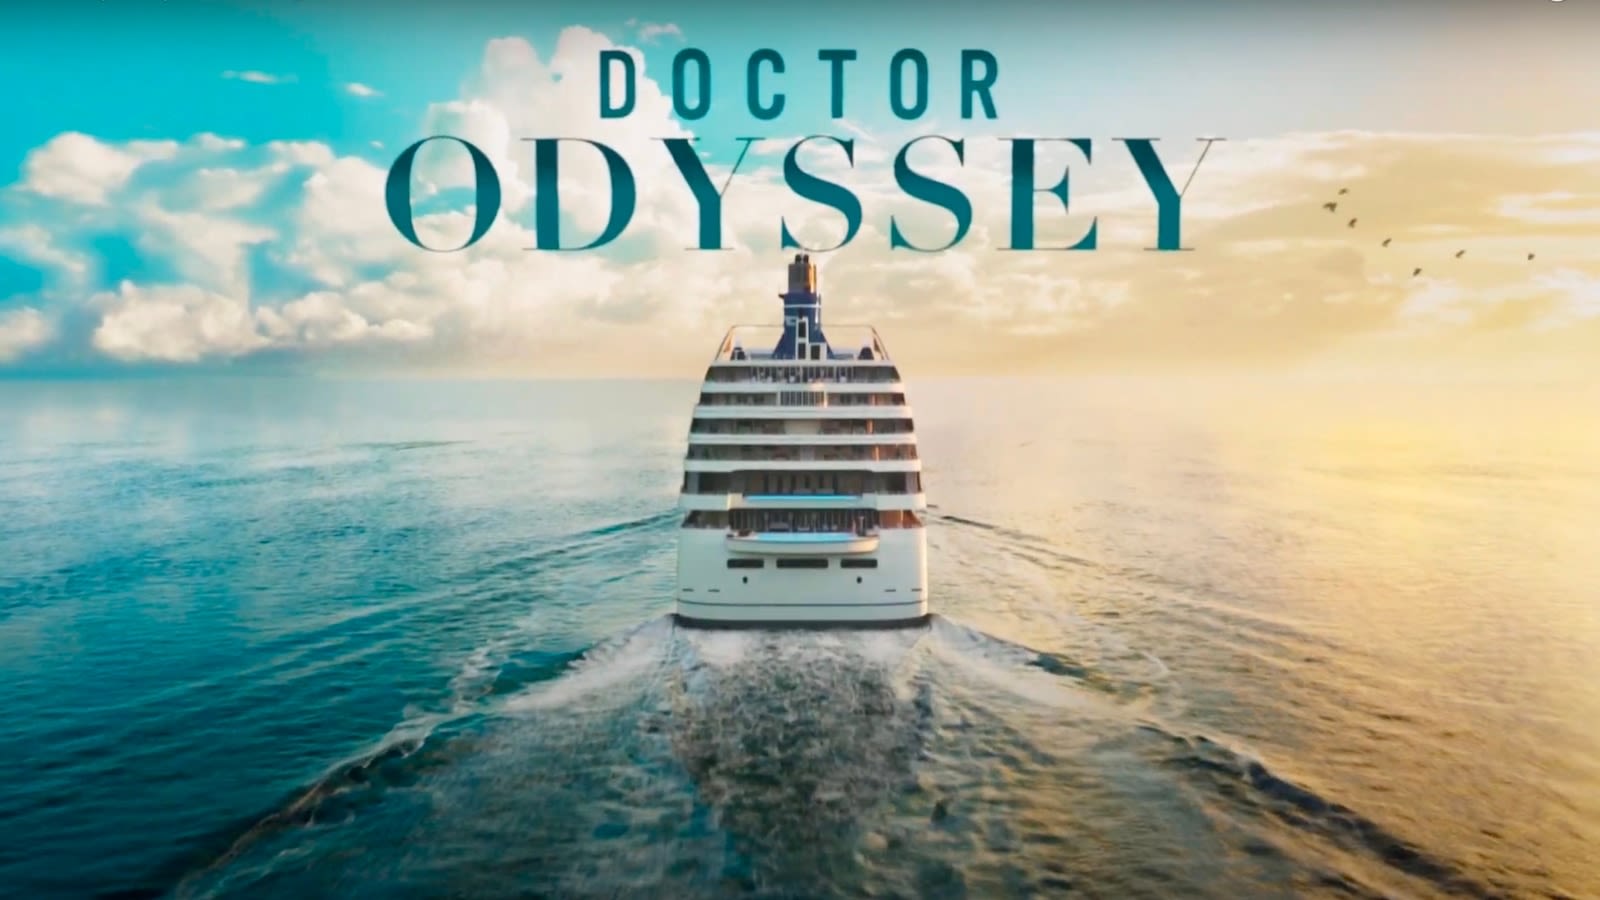 New Ryan Murphy medical drama 'Doctor Odyssey' coming to ABC this fall